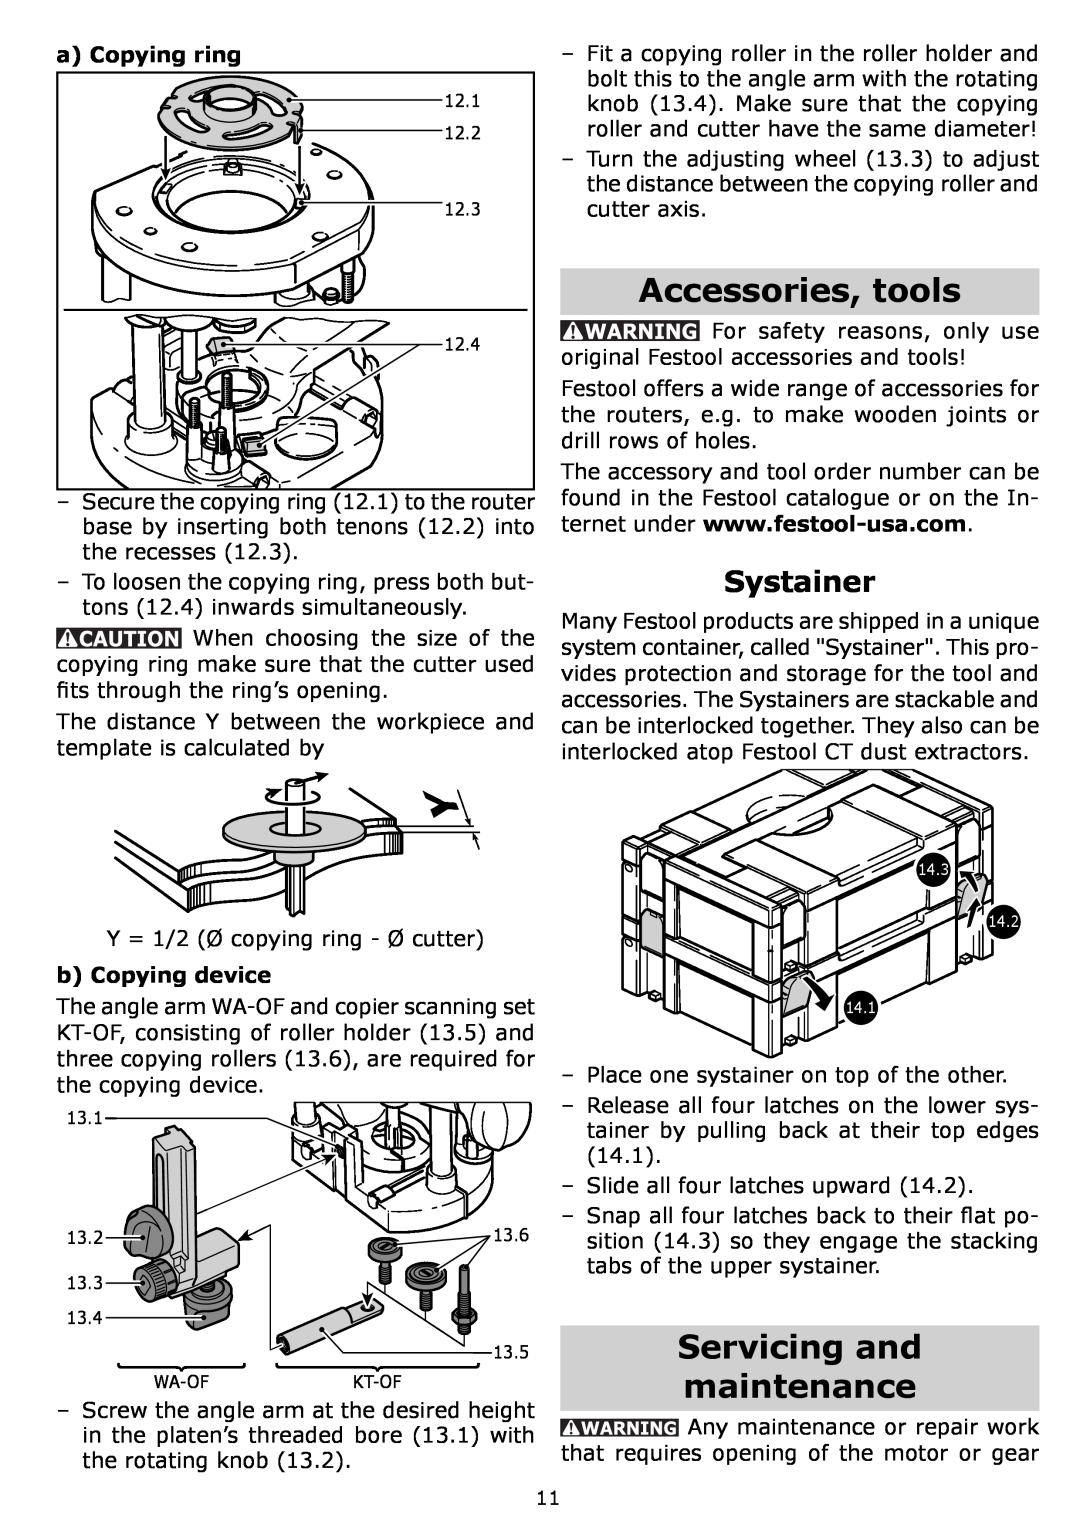 Festool PAC574342, PI574342, PN574342, OF 1400 EQ instruction manual Accessories, tools, Servicing and, maintenance, Systainer 